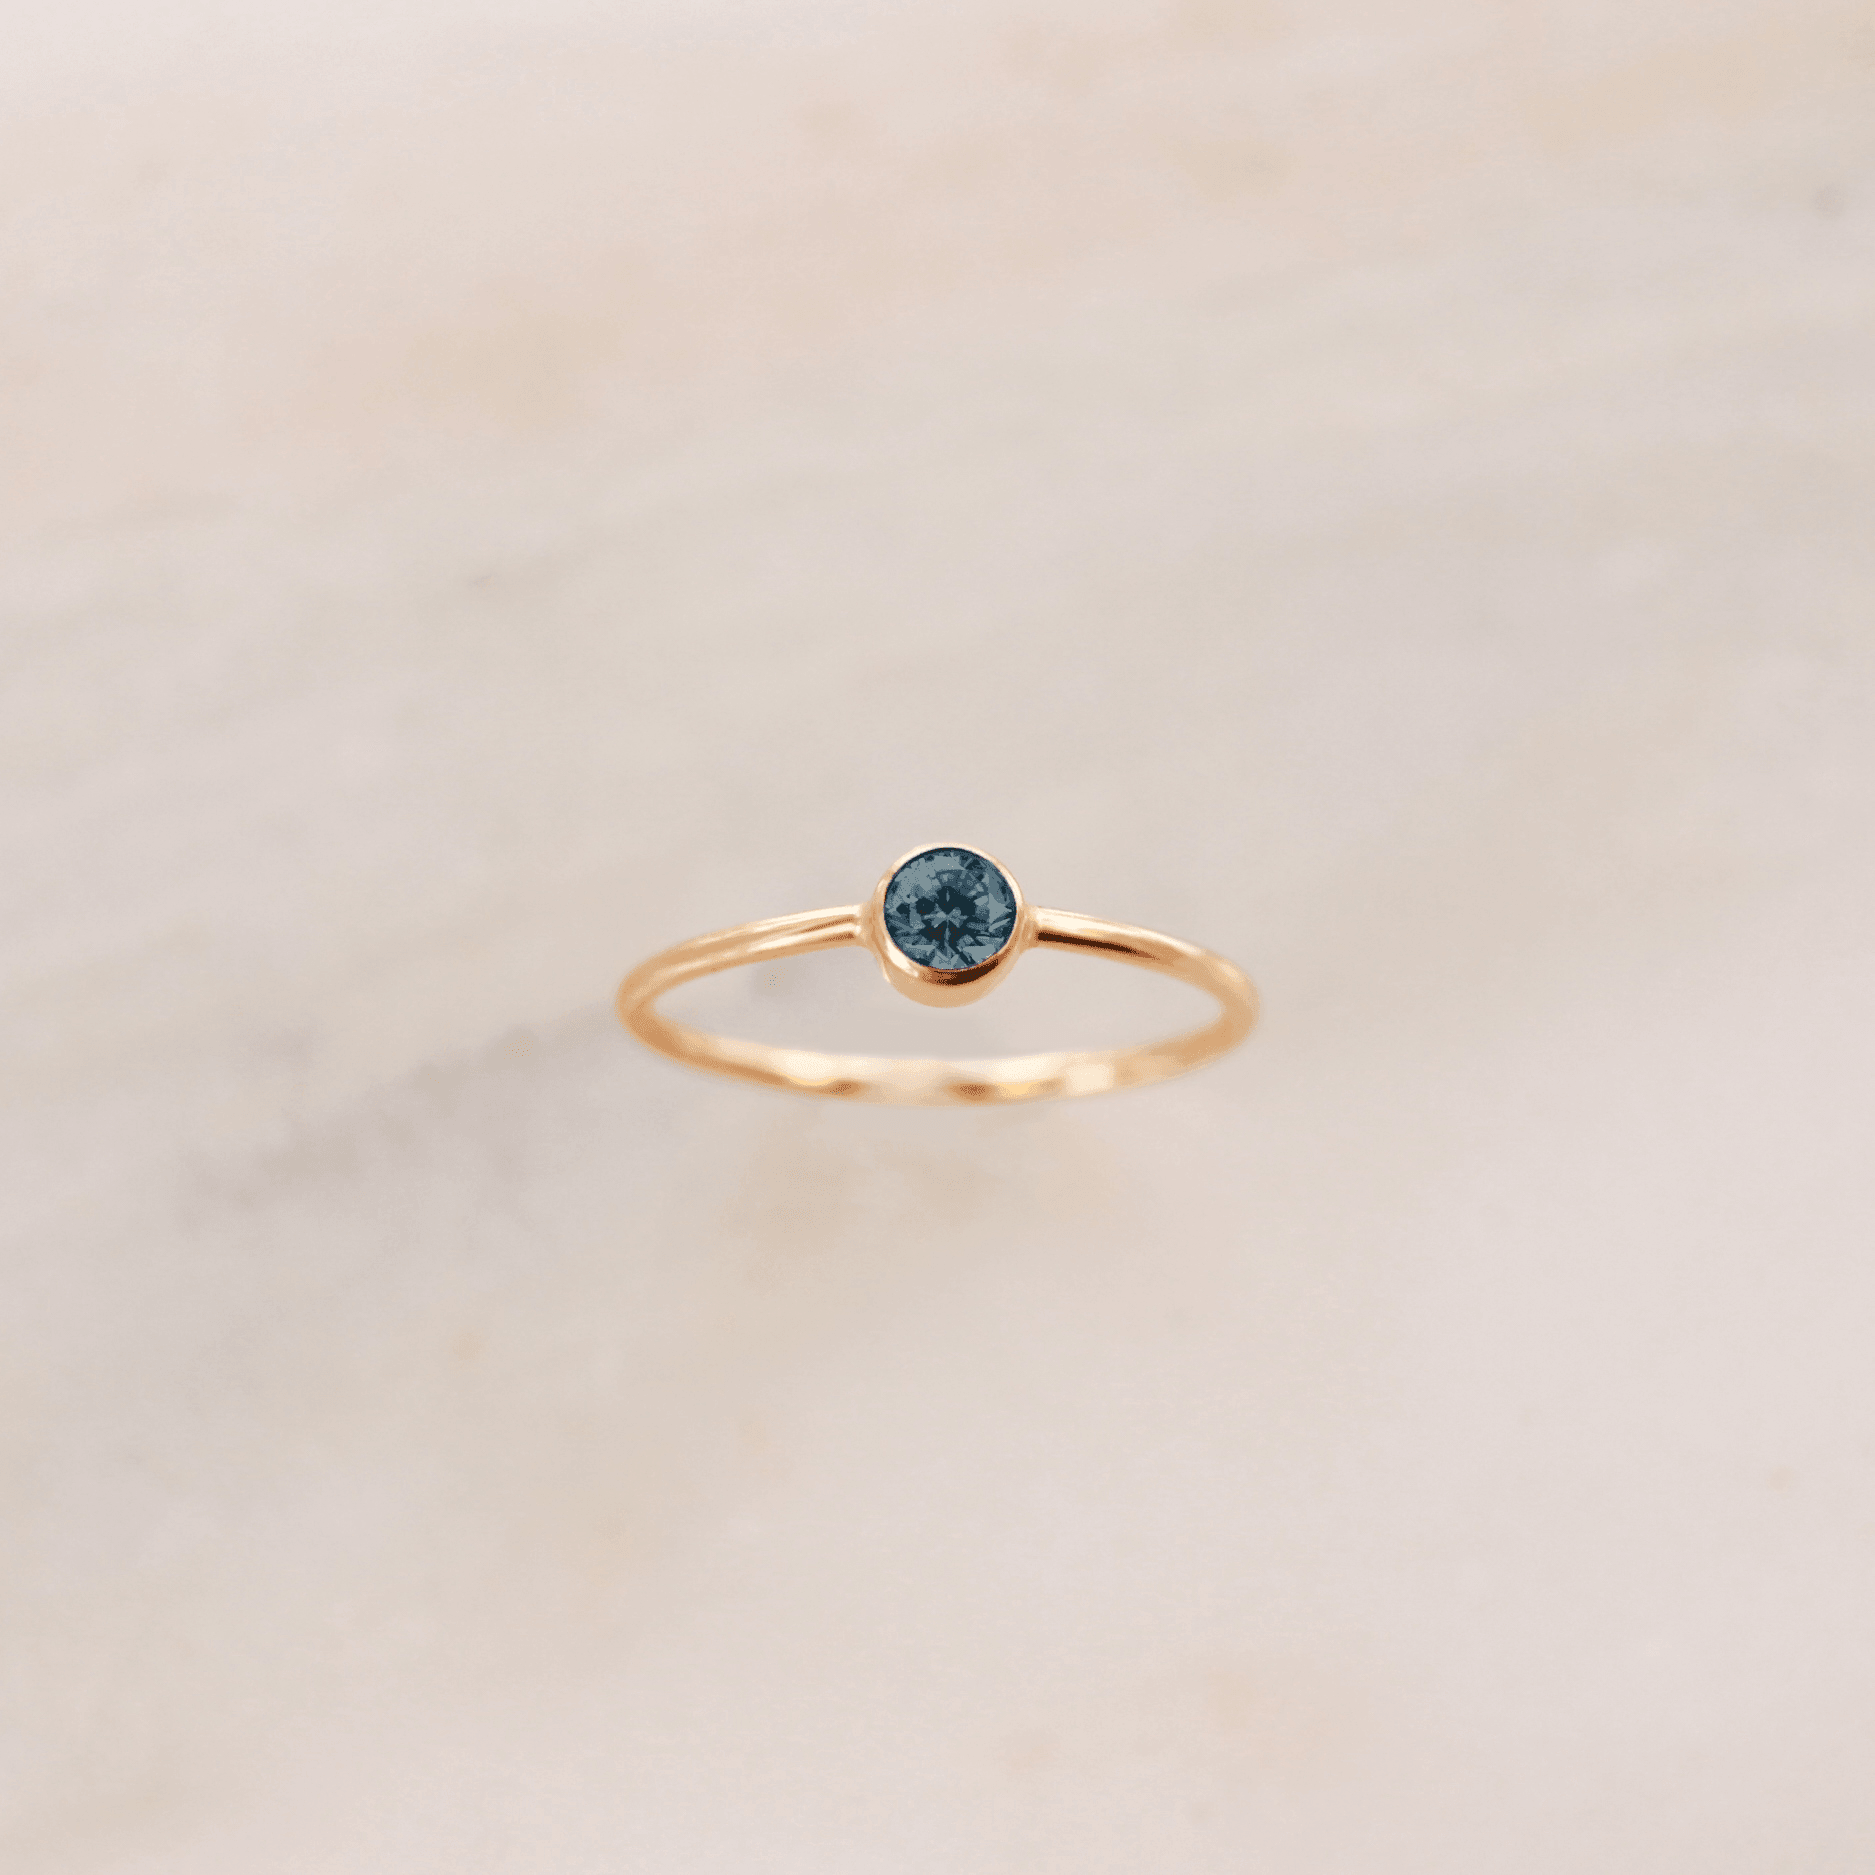 December Birthstone Ring ∙ Blue Zircon - Nolia Jewelry - Meaningful + Sustainably Handcrafted Jewelry